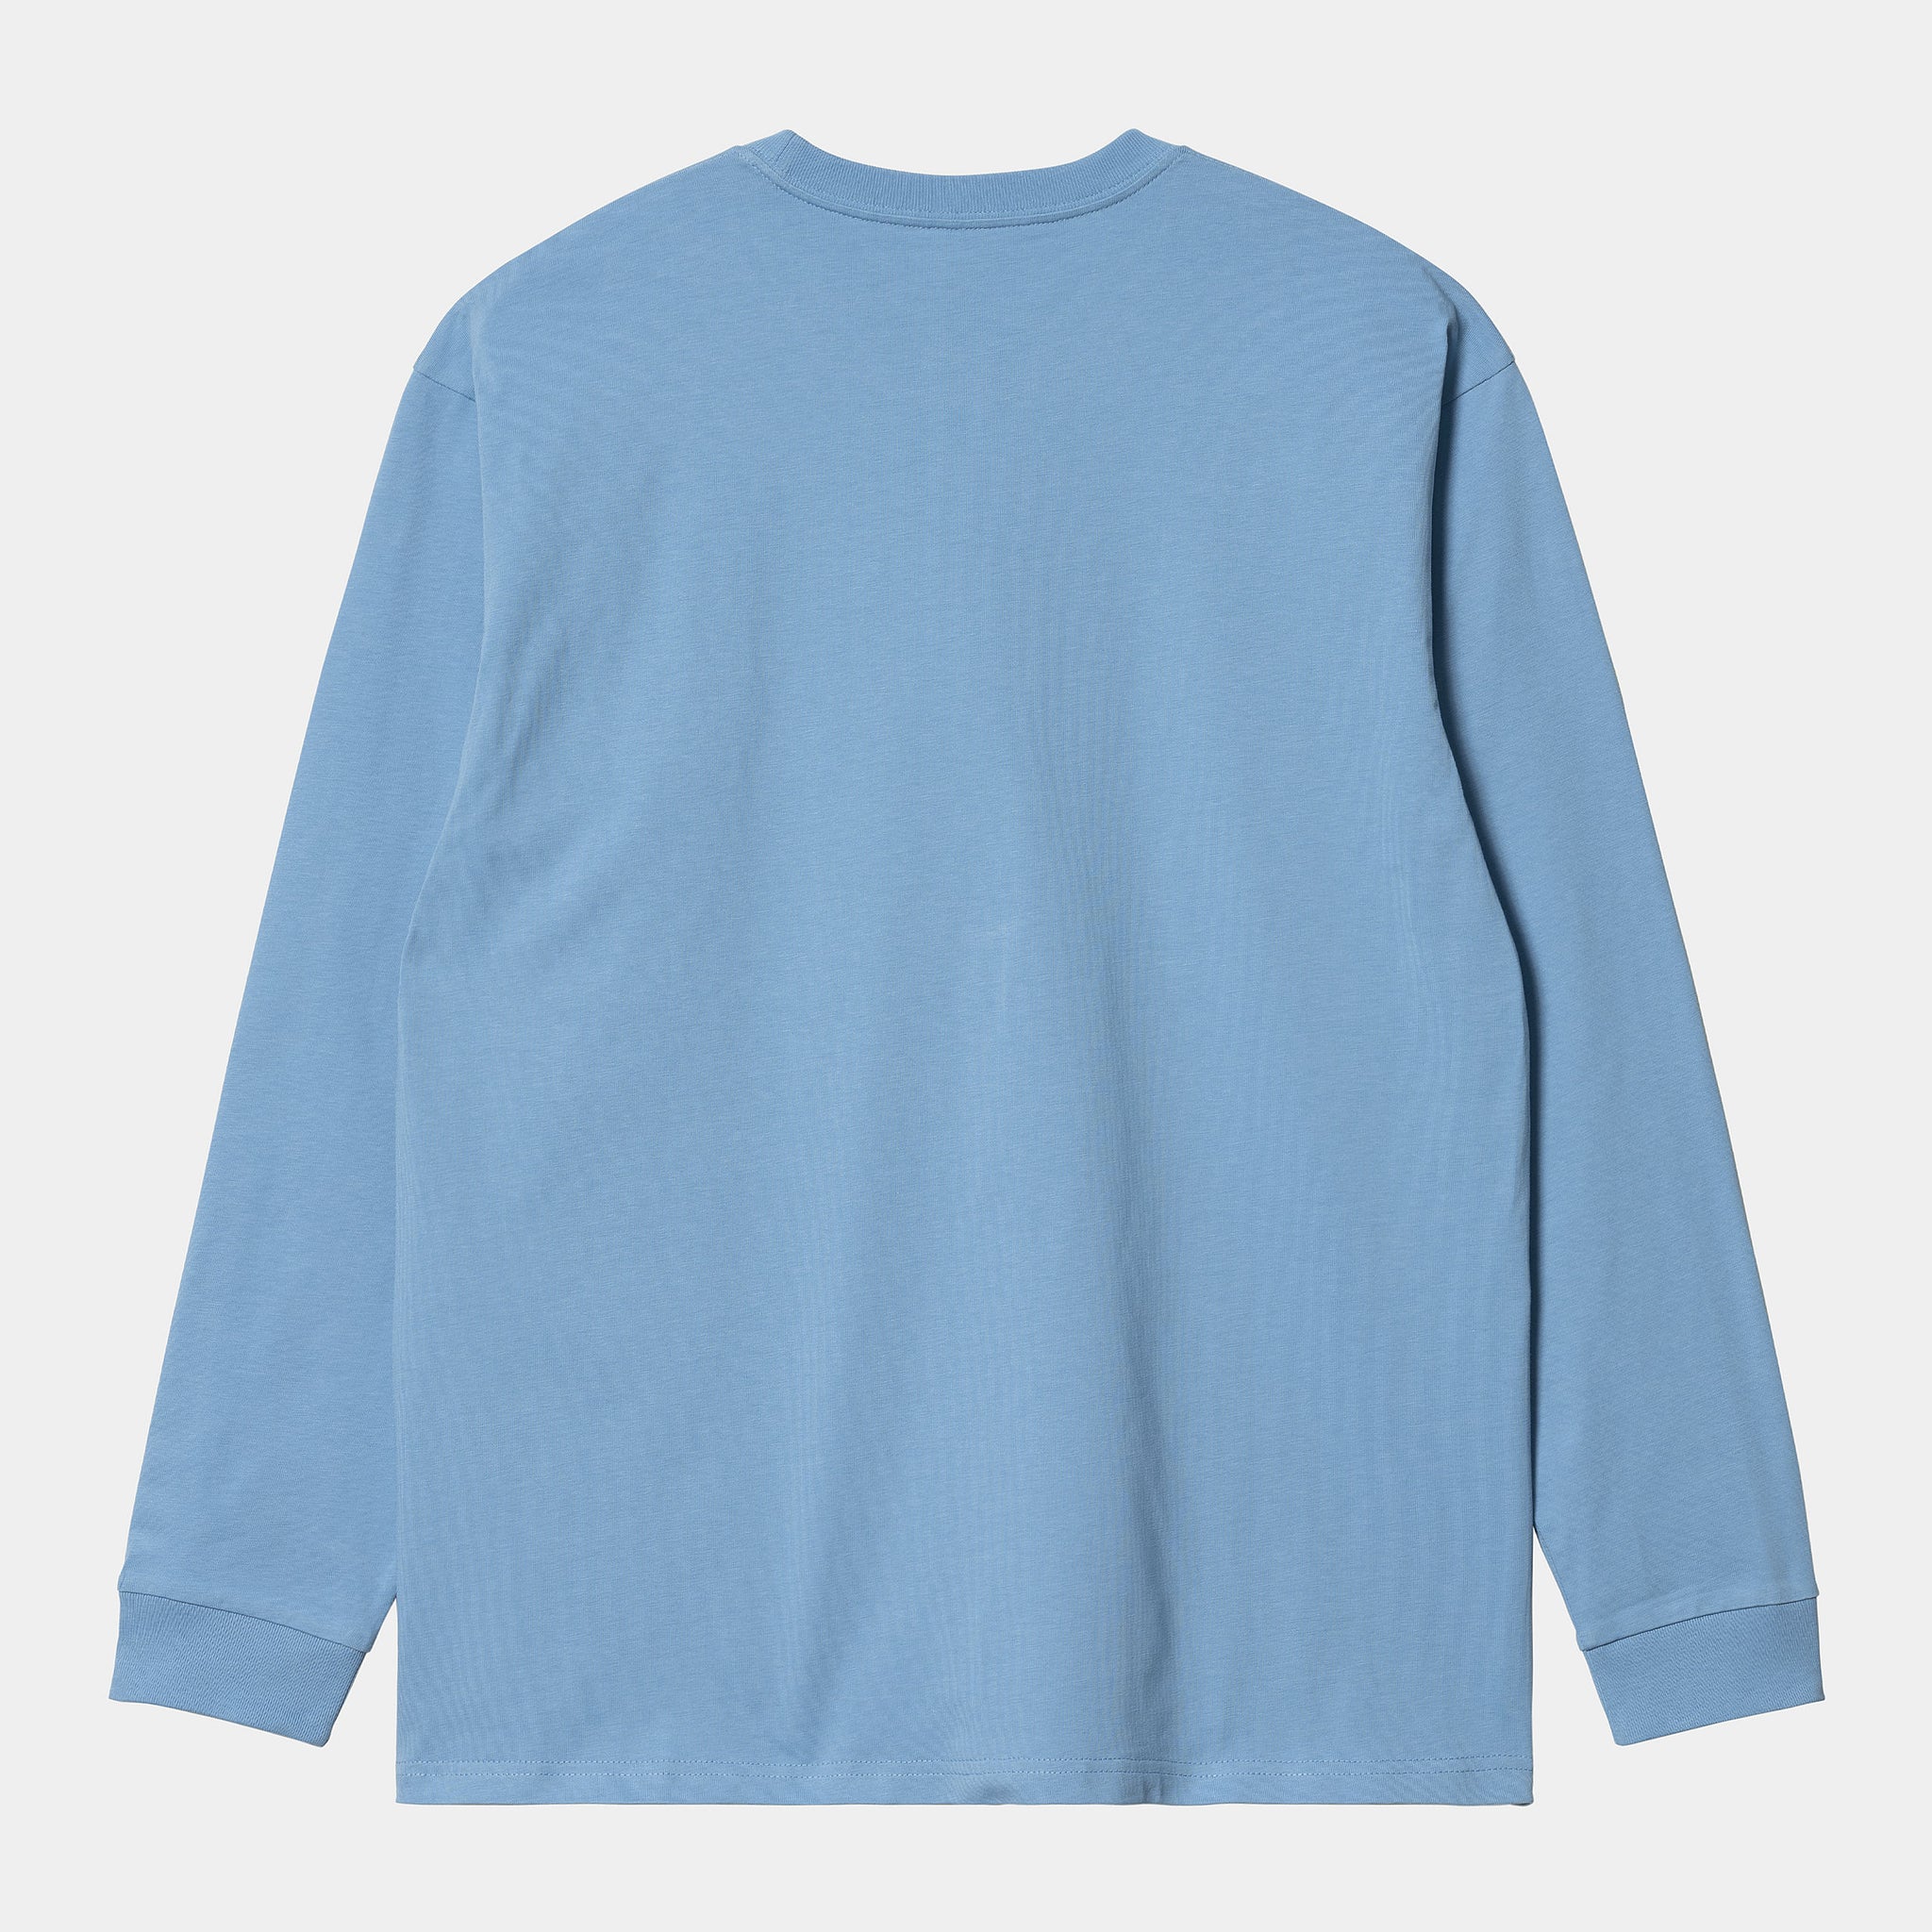 L/s Chase T-shirt 100% Cotton Combed Single Jersey, 235 G/m² (Piscine / Gold)